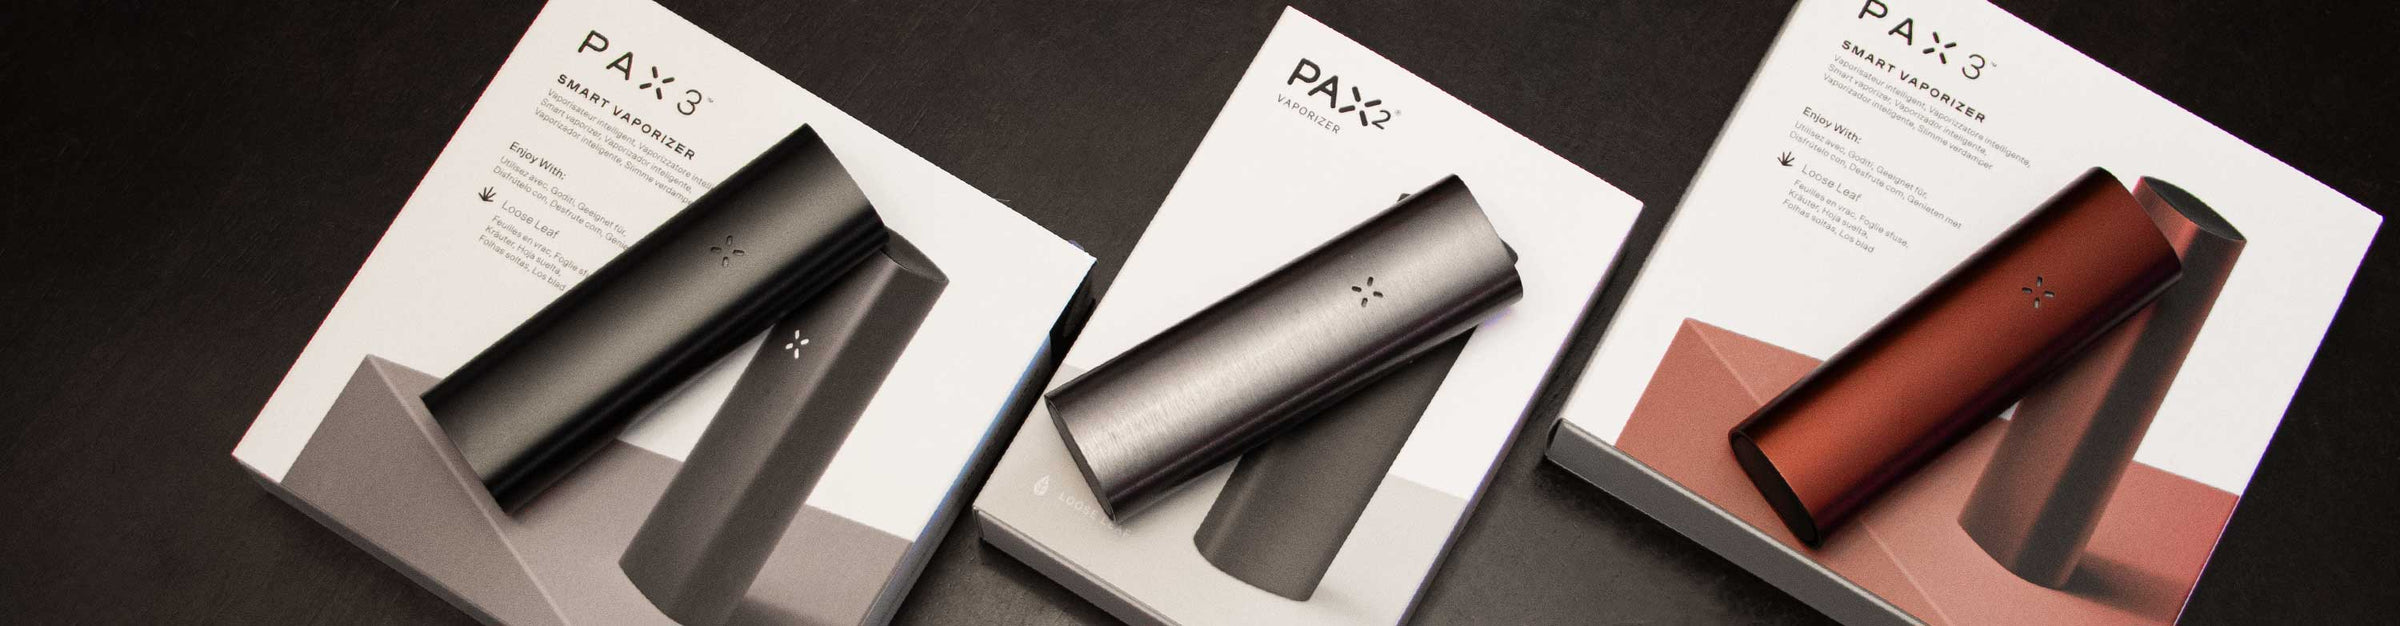 PAX vaporizers laying down with packaging on wooden dinner table.